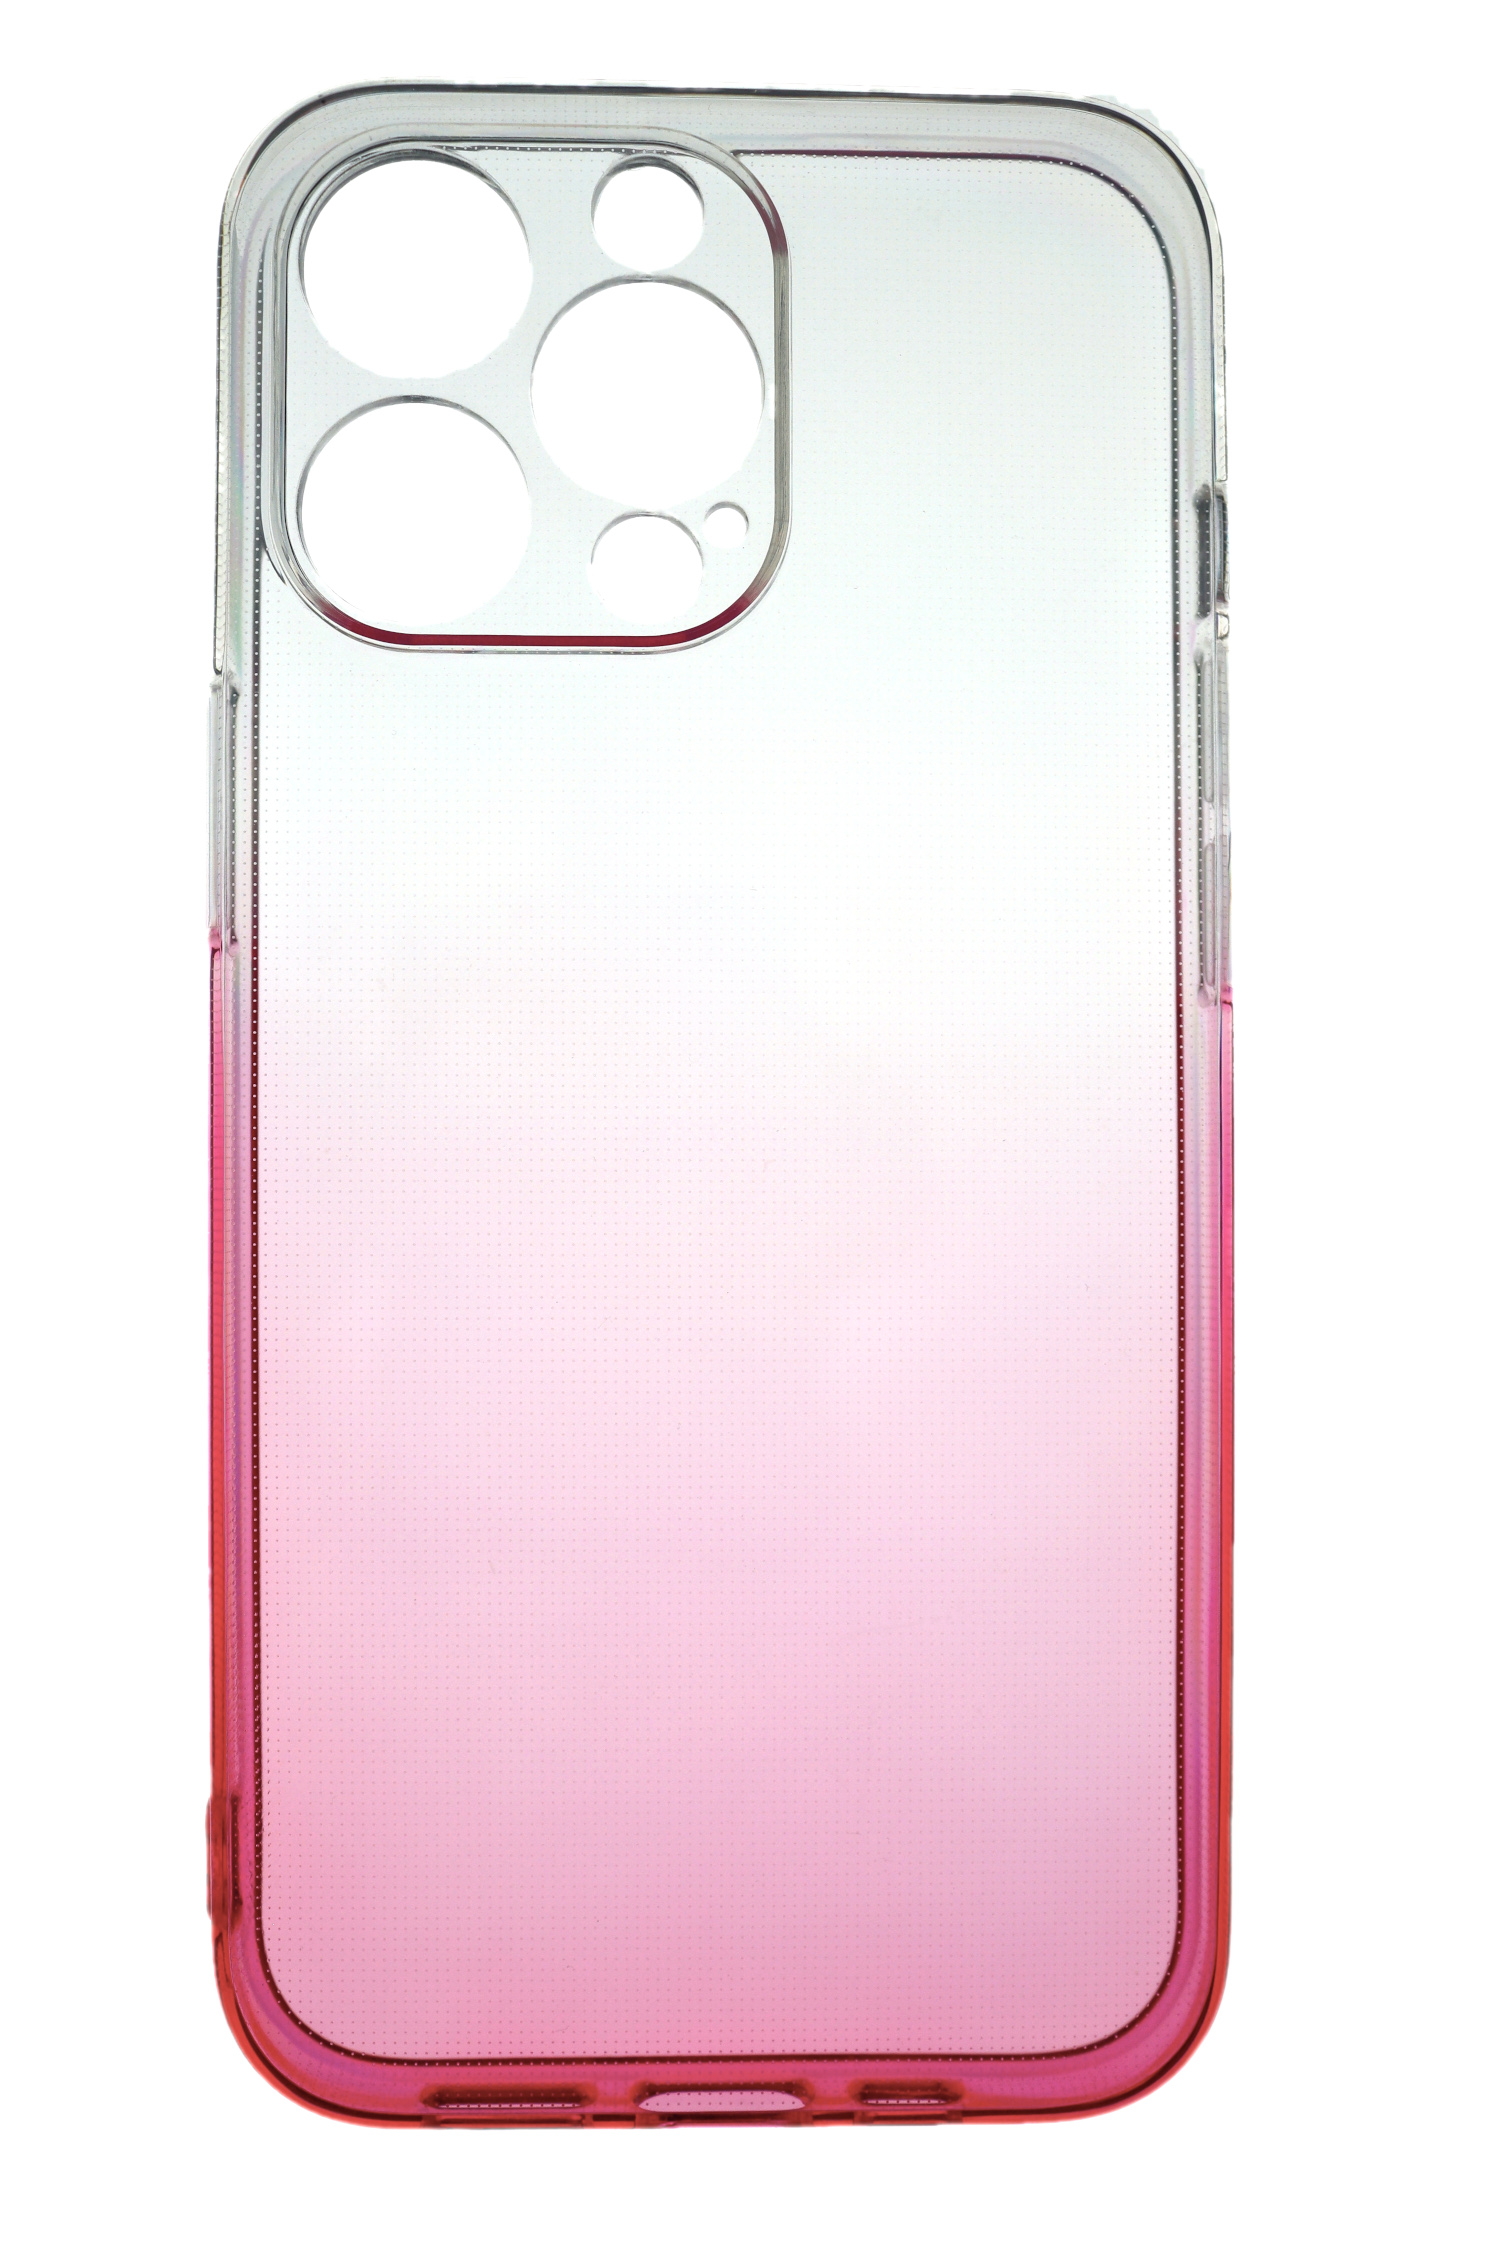 Pro, Apple, Backcover, Case Pink, iPhone 2.0 Transparent TPU 13 JAMCOVER Strong, mm